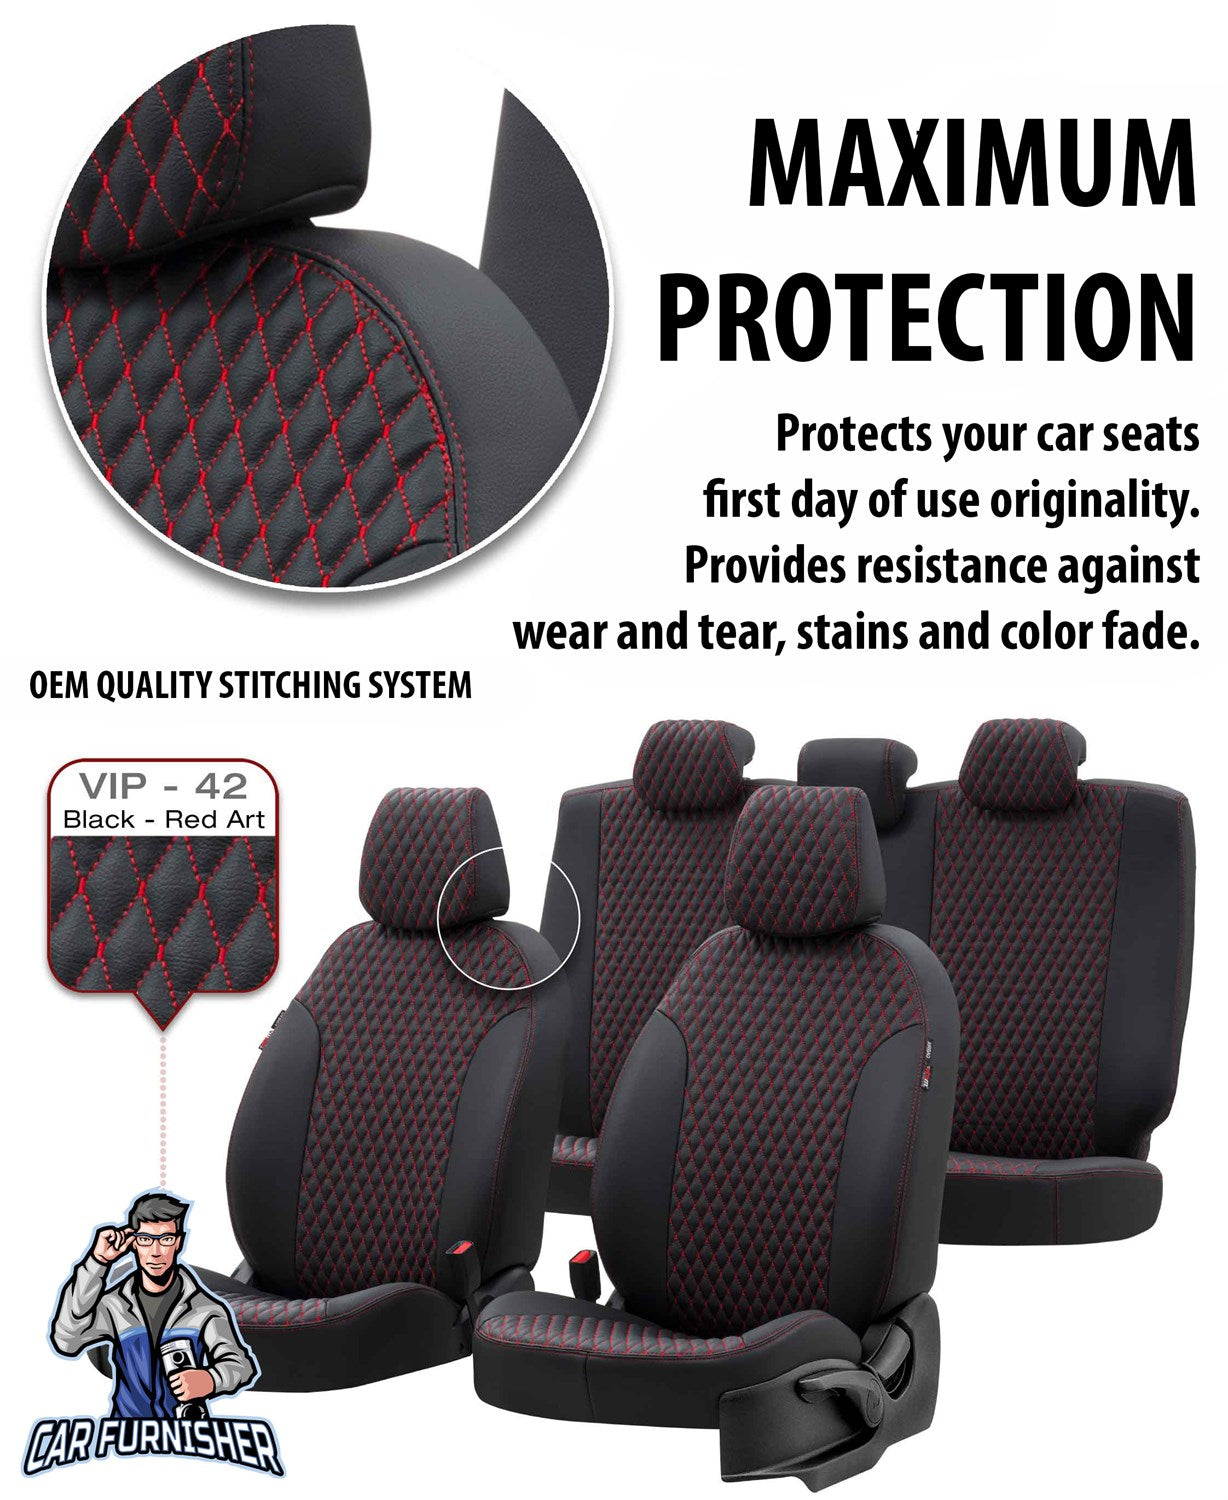 Mercedes B Class Seat Covers Amsterdam Leather Design Black Leather